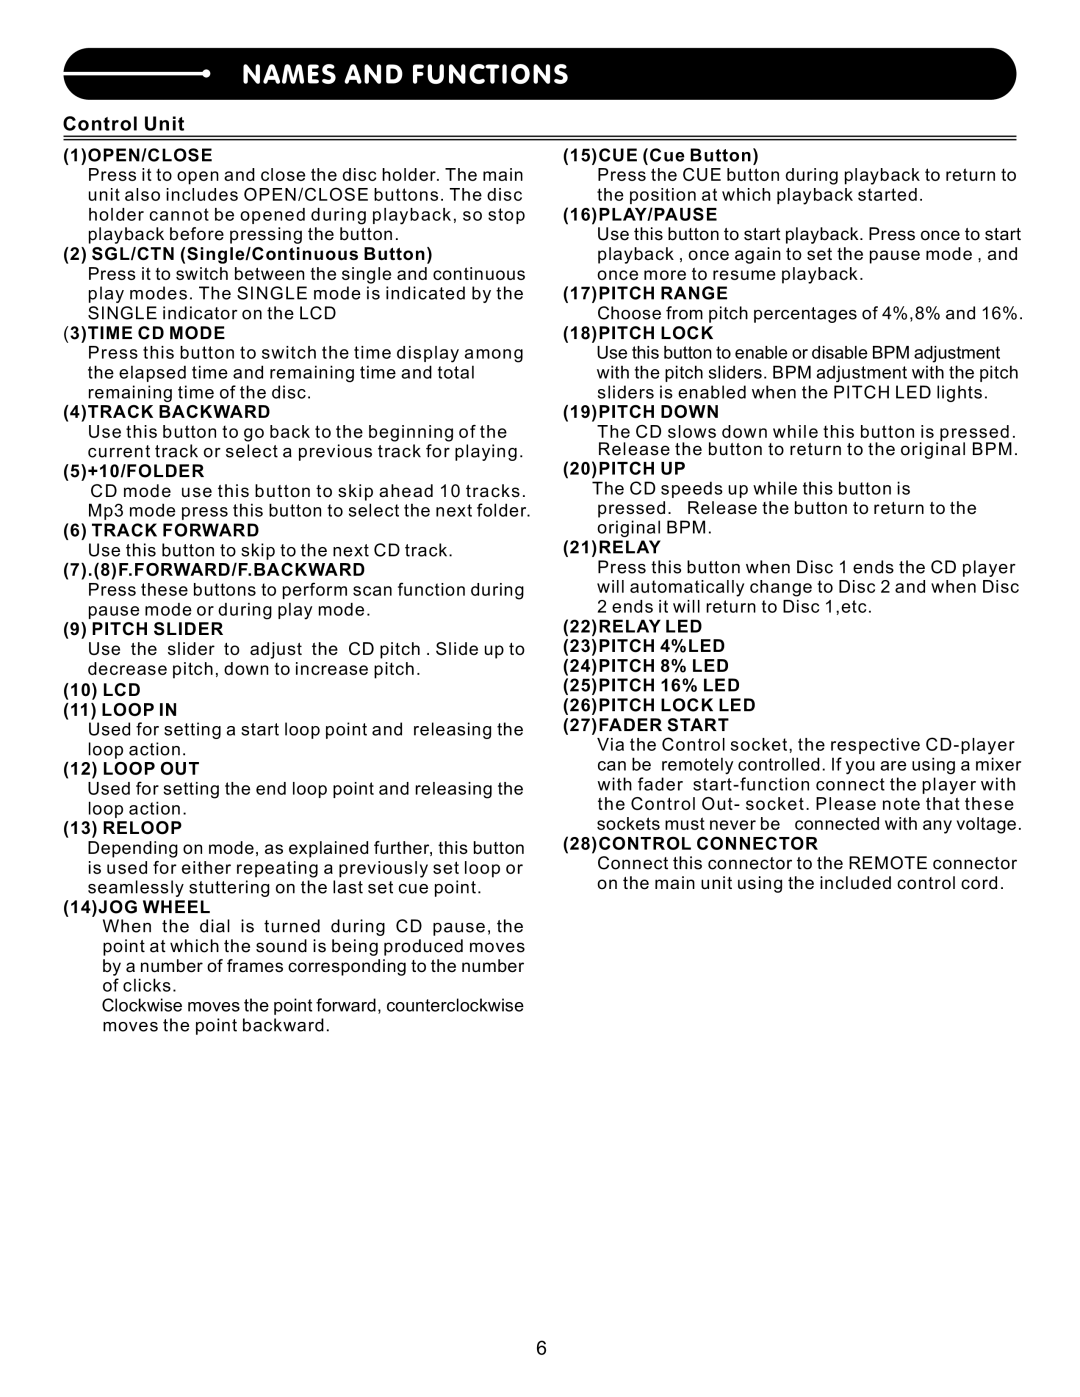 Stanton C.502 user manual Names And Functions, Control Unit 